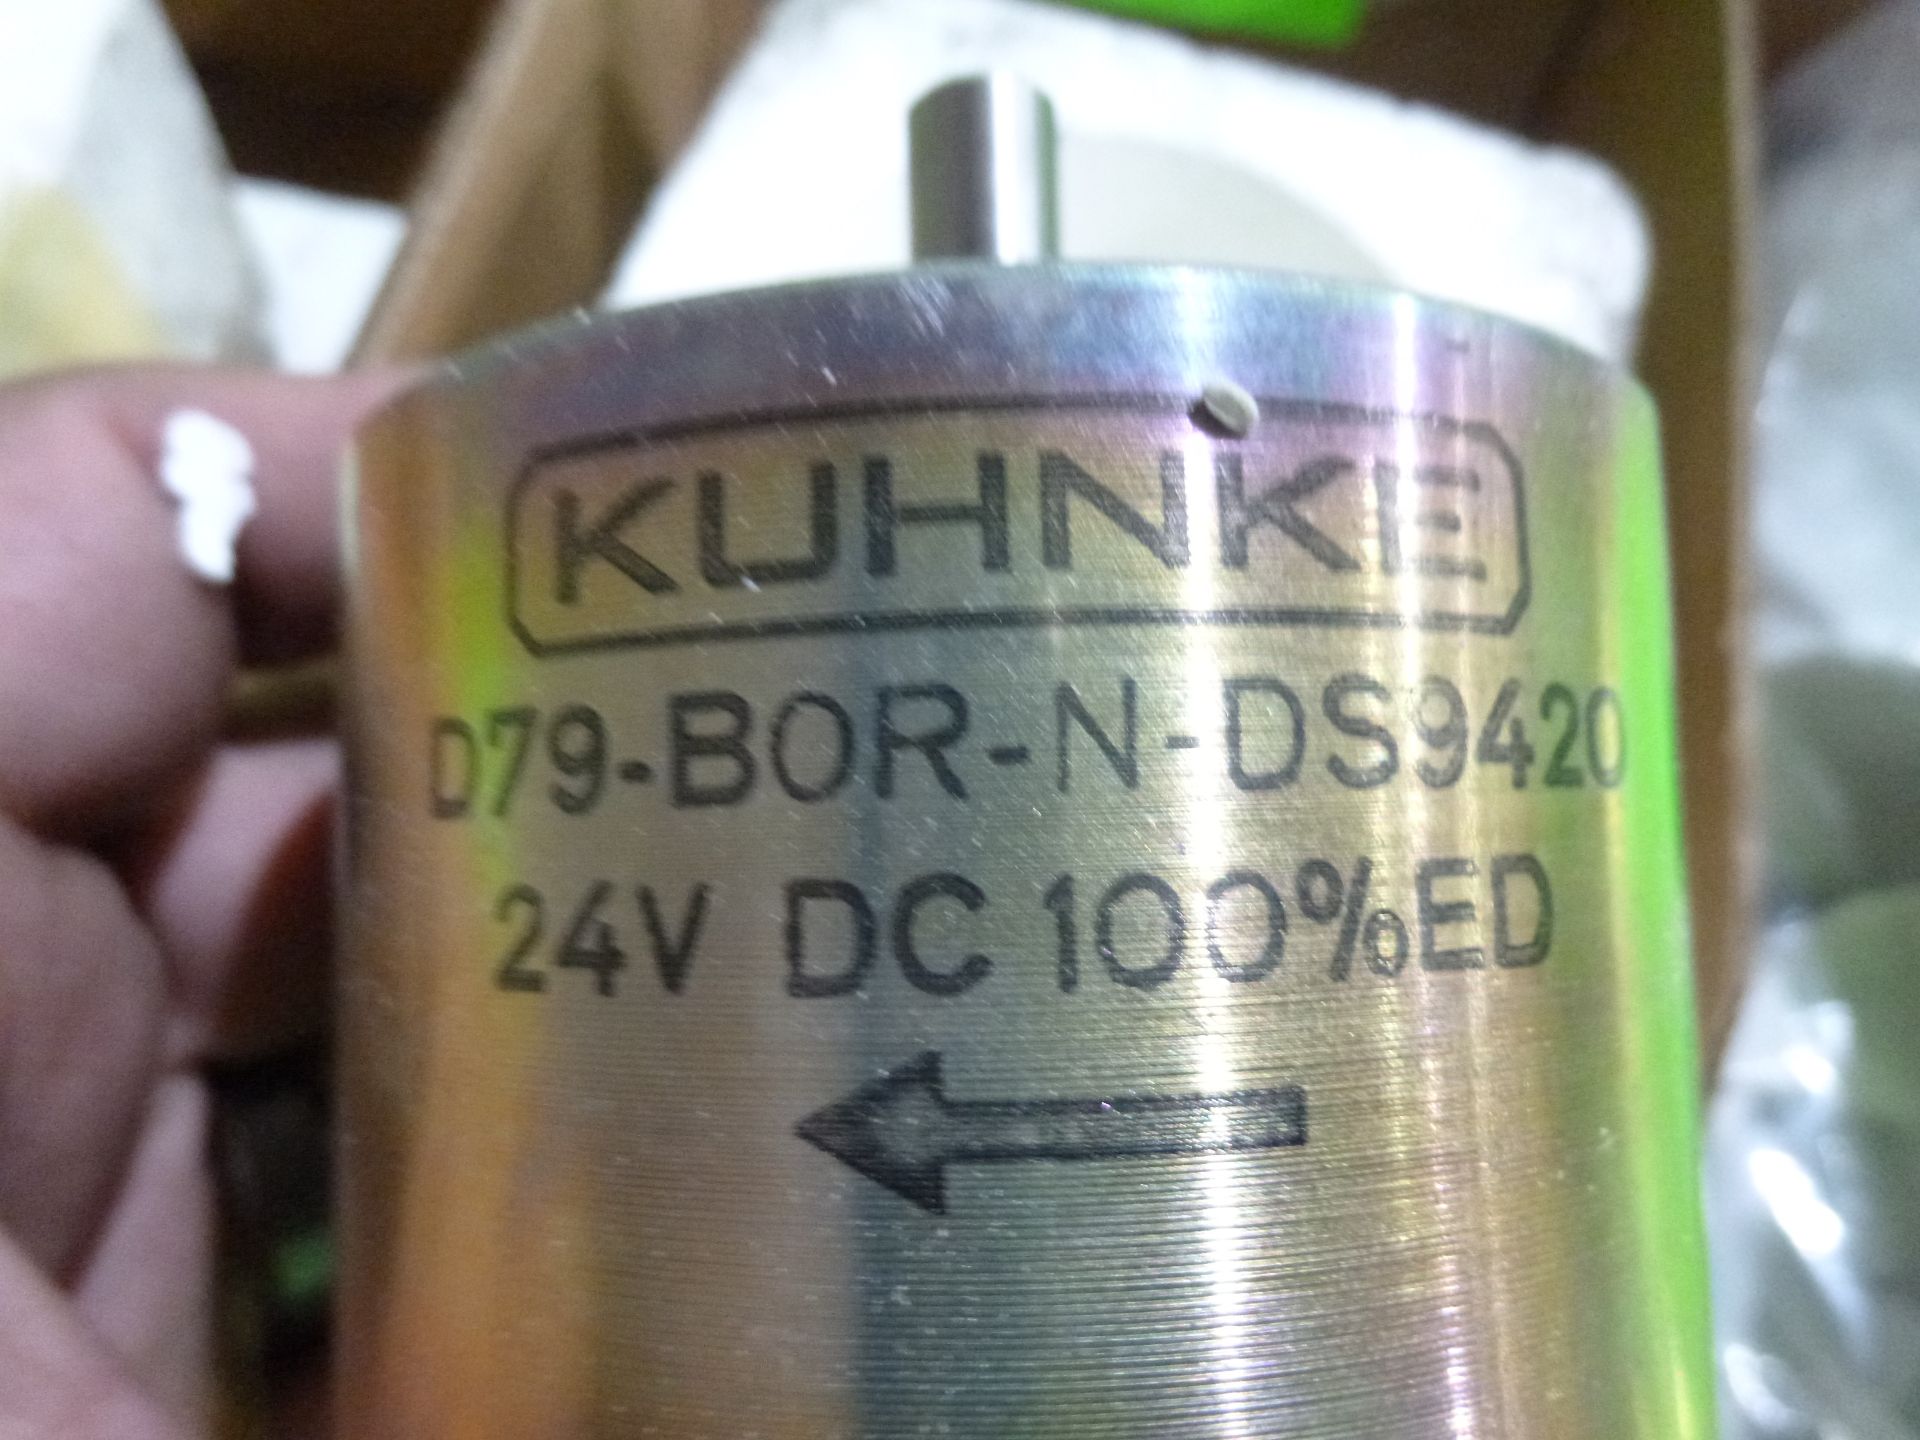 Kuhnke Model D79-BOR-N-DS9420, new in packages, as always with Brolyn LLC auctions, all lots can